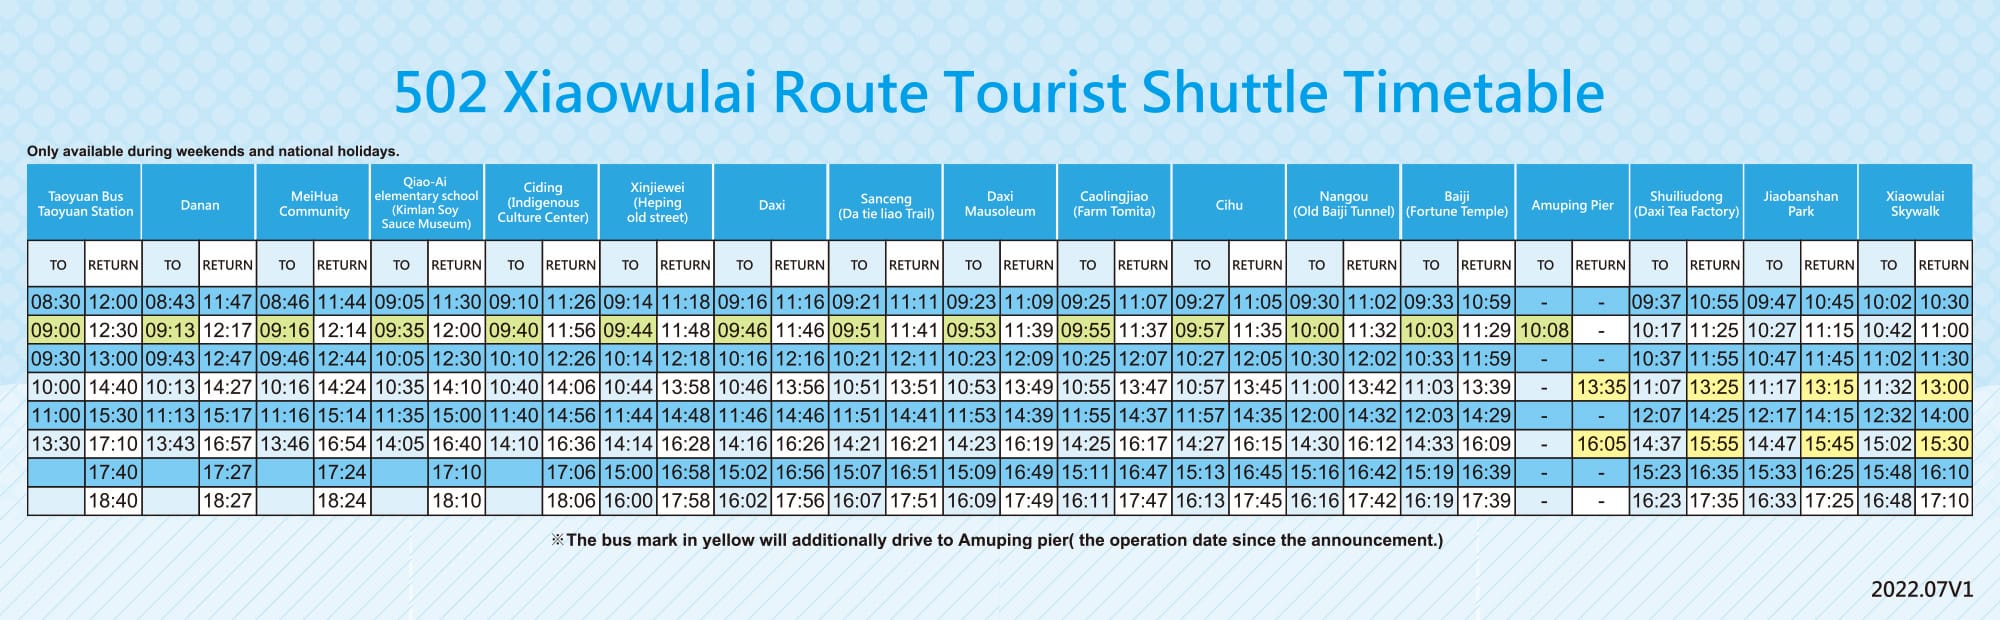 Xiaowulai Route Timetable